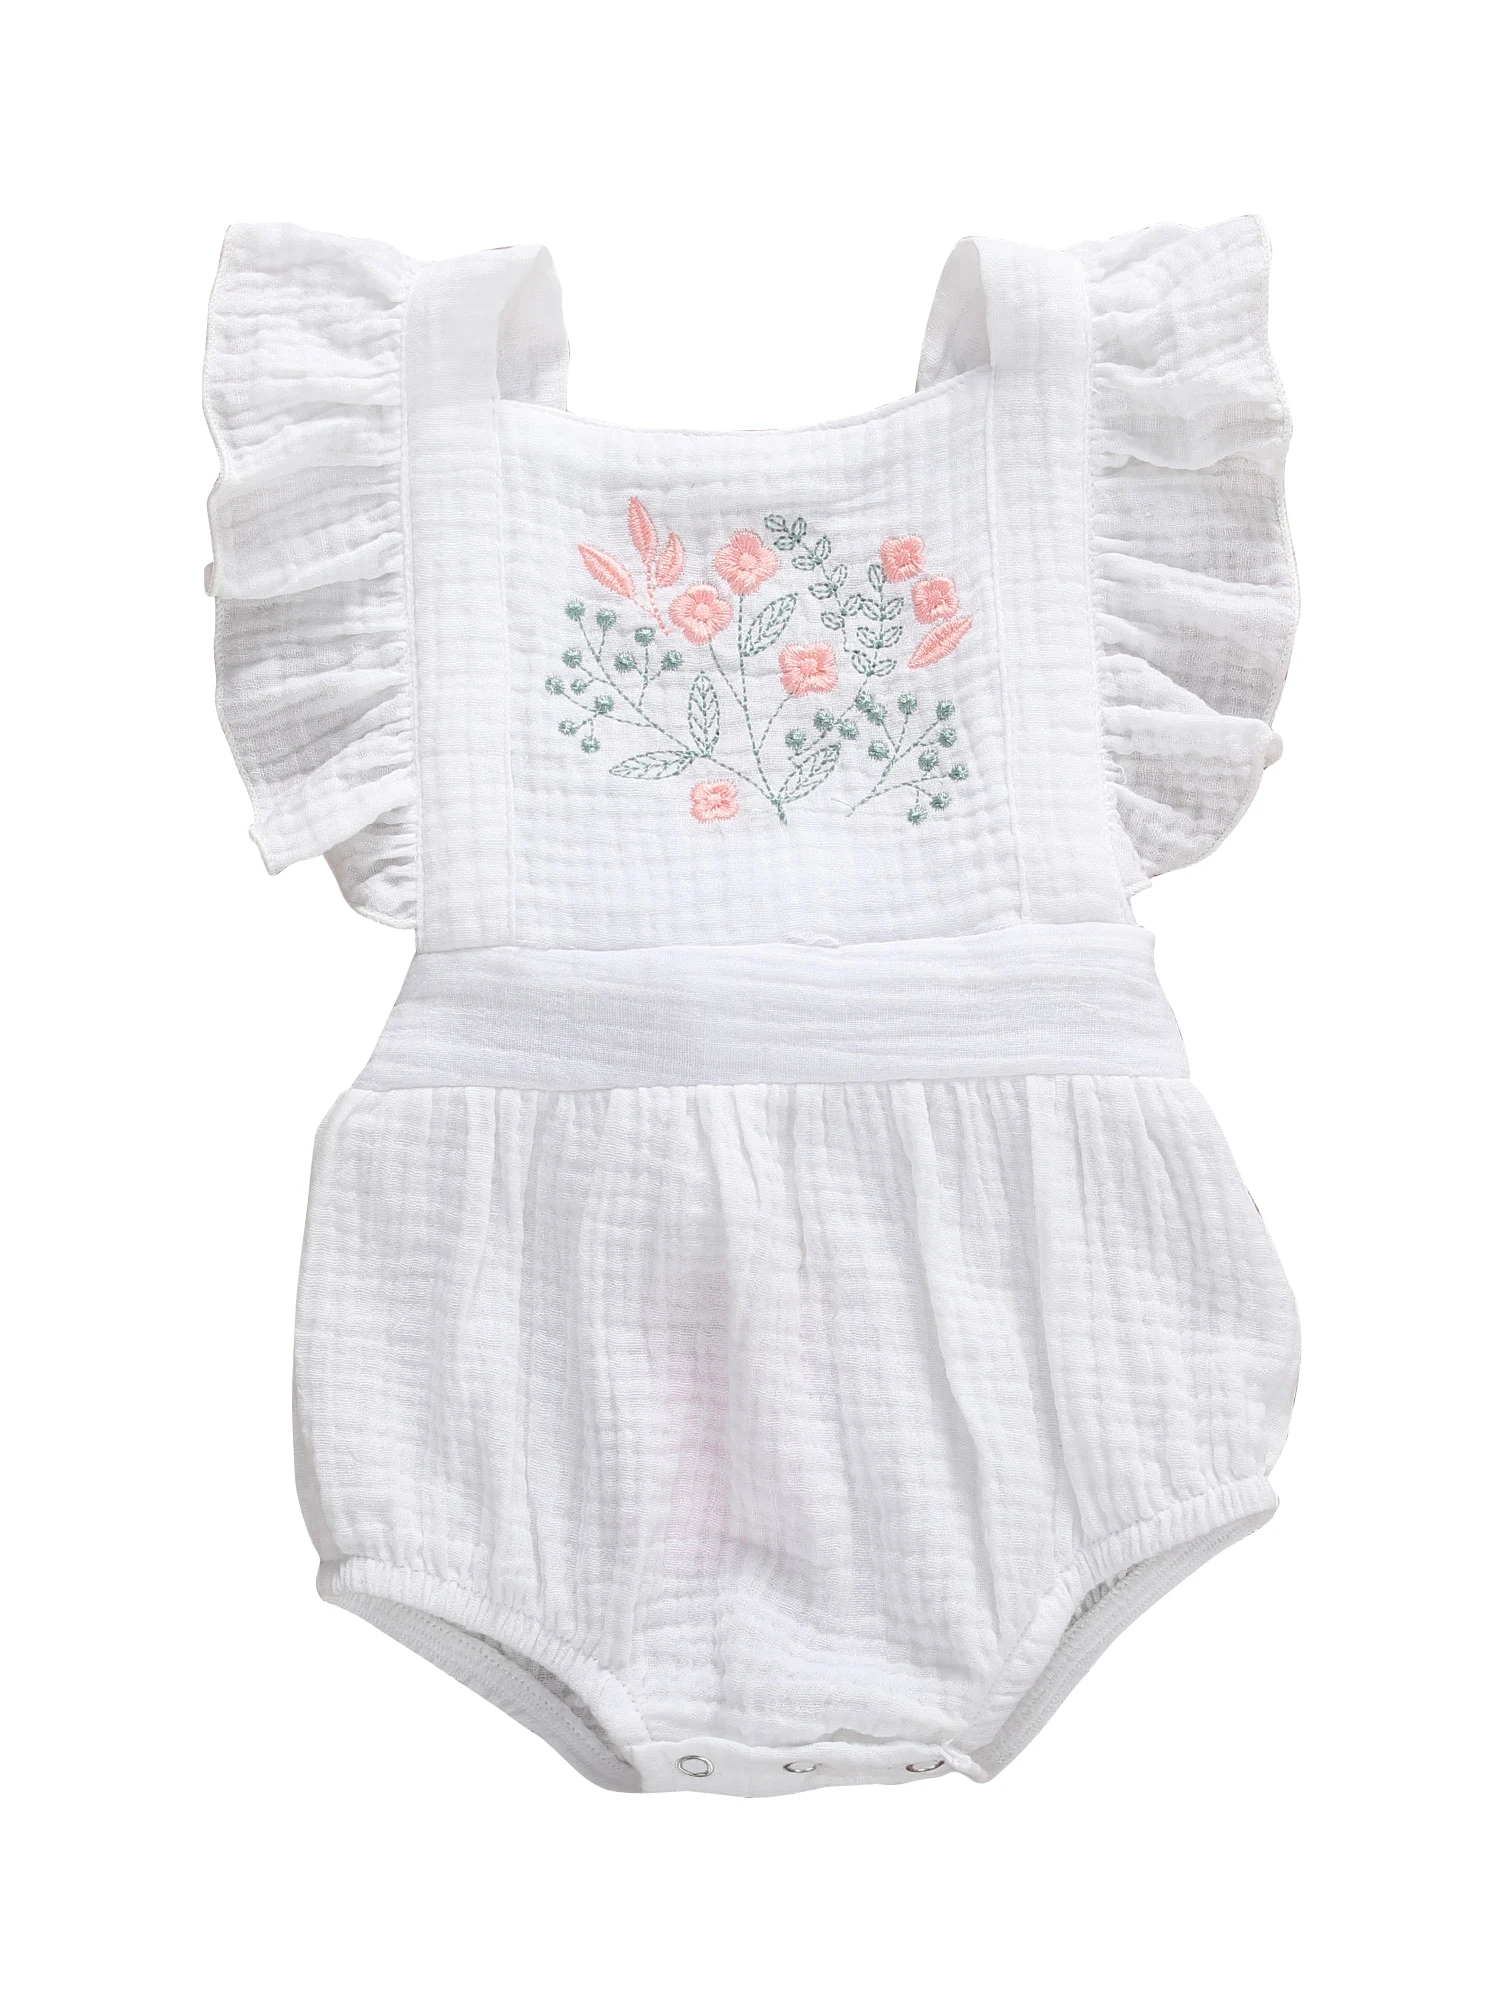 

Baby Cute Romper Embroidered Sleeveless Ruffle Decorated Snap Button Closure Breathable Jumpsuit Summer Baby Girl Clothes